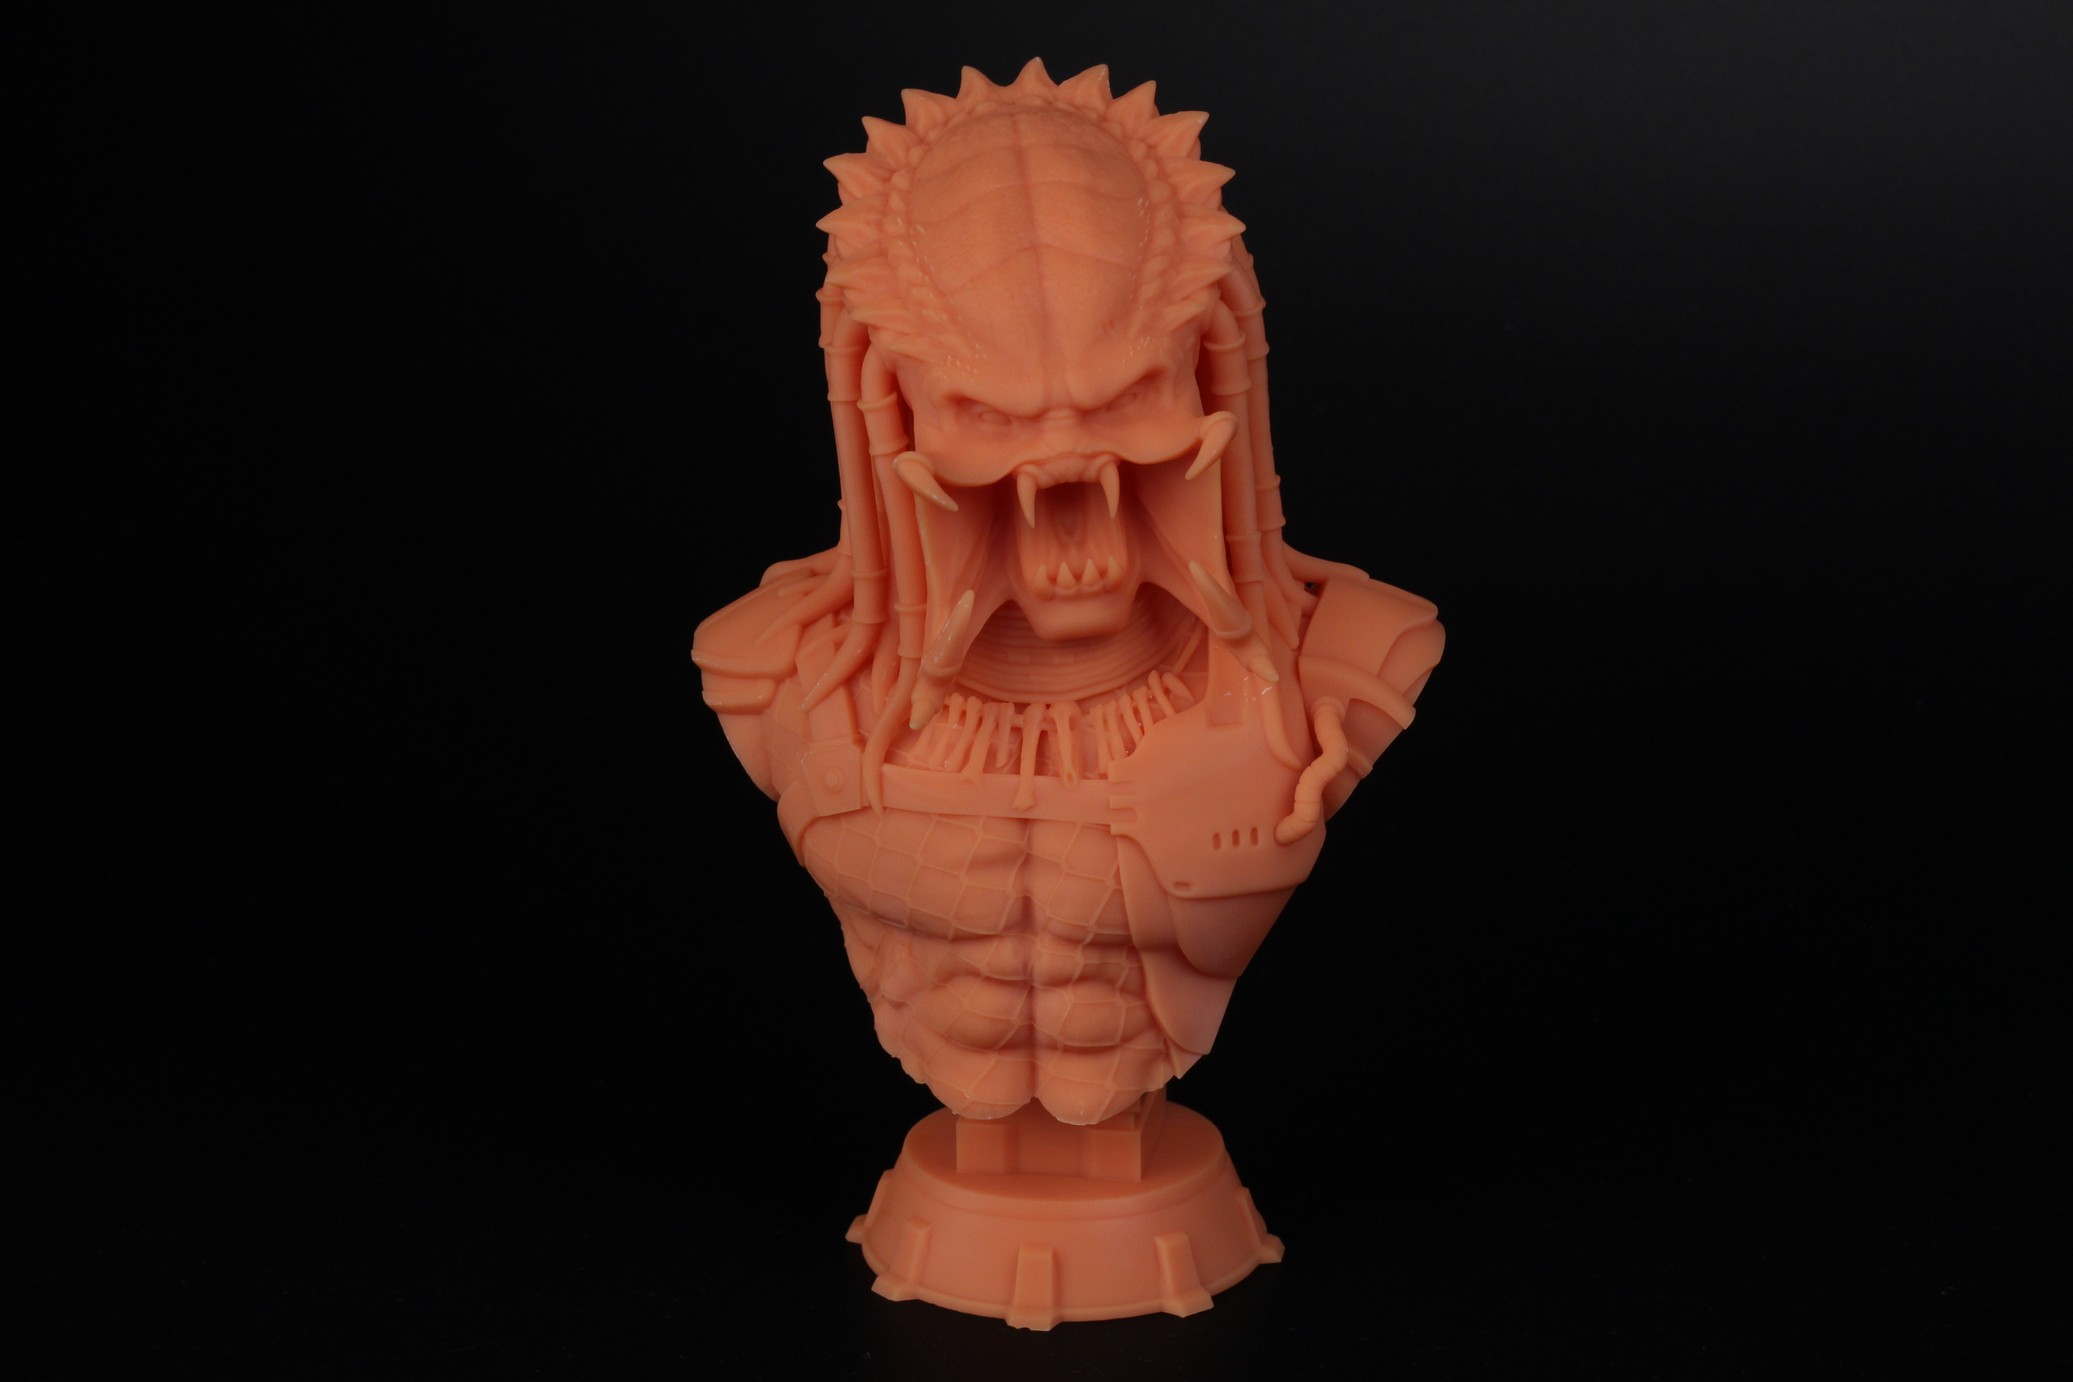 Predator Bust Anycubic Photon M3 Max Review 5 | Anycubic Photon M3 Max Review: Who Needs FDM Anymore?